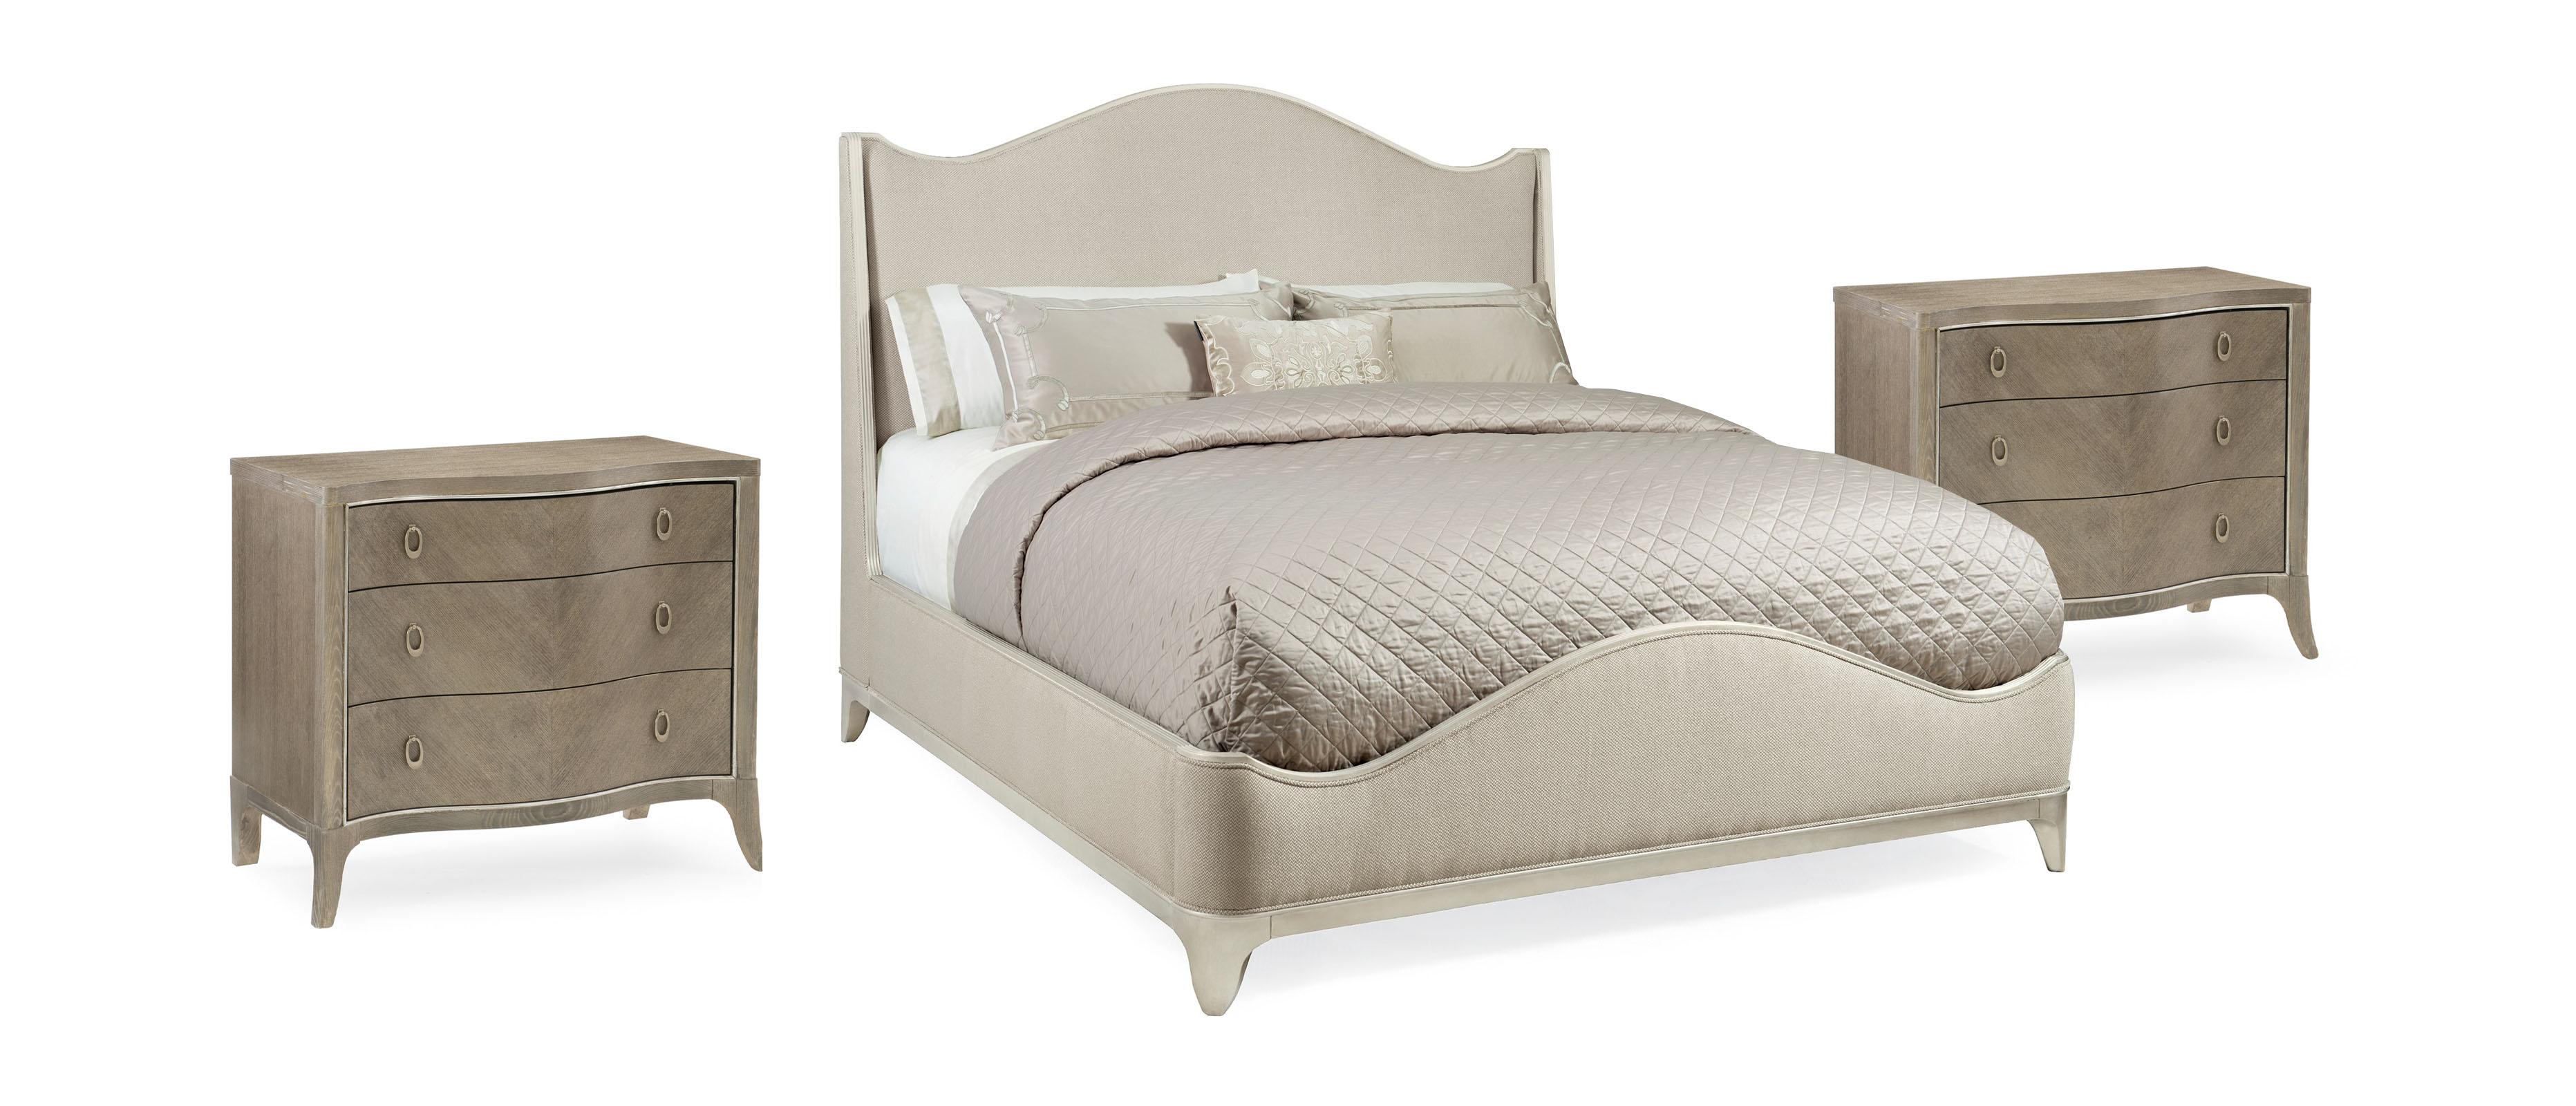 Contemporary Sleight Bedroom Set AVONDALE QUEEN UPHOLSTERED BED / AVONDALE NIGHTSTAND C023-417-101-Set-3 in Cream, Silver Fabric